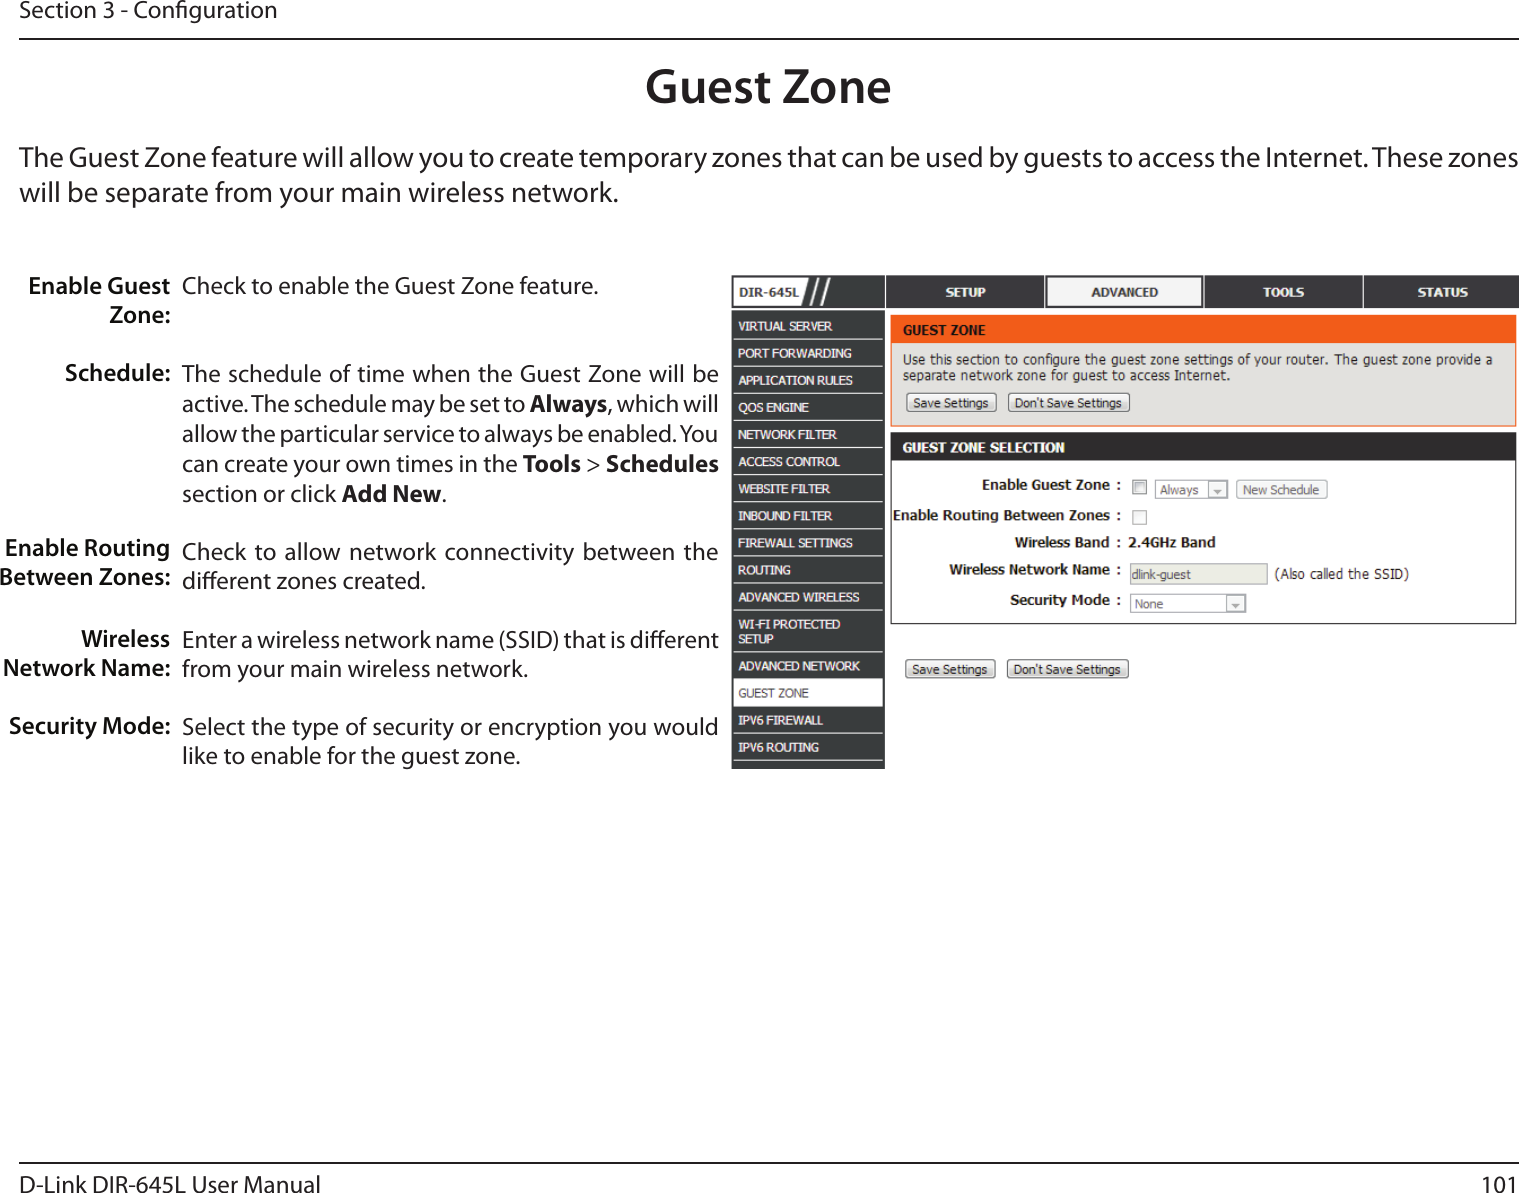 101D-Link DIR-645L User ManualSection 3 - CongurationGuest ZoneCheck to enable the Guest Zone feature. The schedule of time when the Guest Zone will be active. The schedule may be set to Always, which will allow the particular service to always be enabled. You can create your own times in the Tools &gt; Schedules section or click Add New.Check to allow network connectivity between the dierent zones created. Enter a wireless network name (SSID) that is dierent from your main wireless network.Select the type of security or encryption you would like to enable for the guest zone.  Enable Guest Zone:Schedule:Enable Routing Between Zones:Wireless Network Name:Security Mode:The Guest Zone feature will allow you to create temporary zones that can be used by guests to access the Internet. These zones will be separate from your main wireless network.